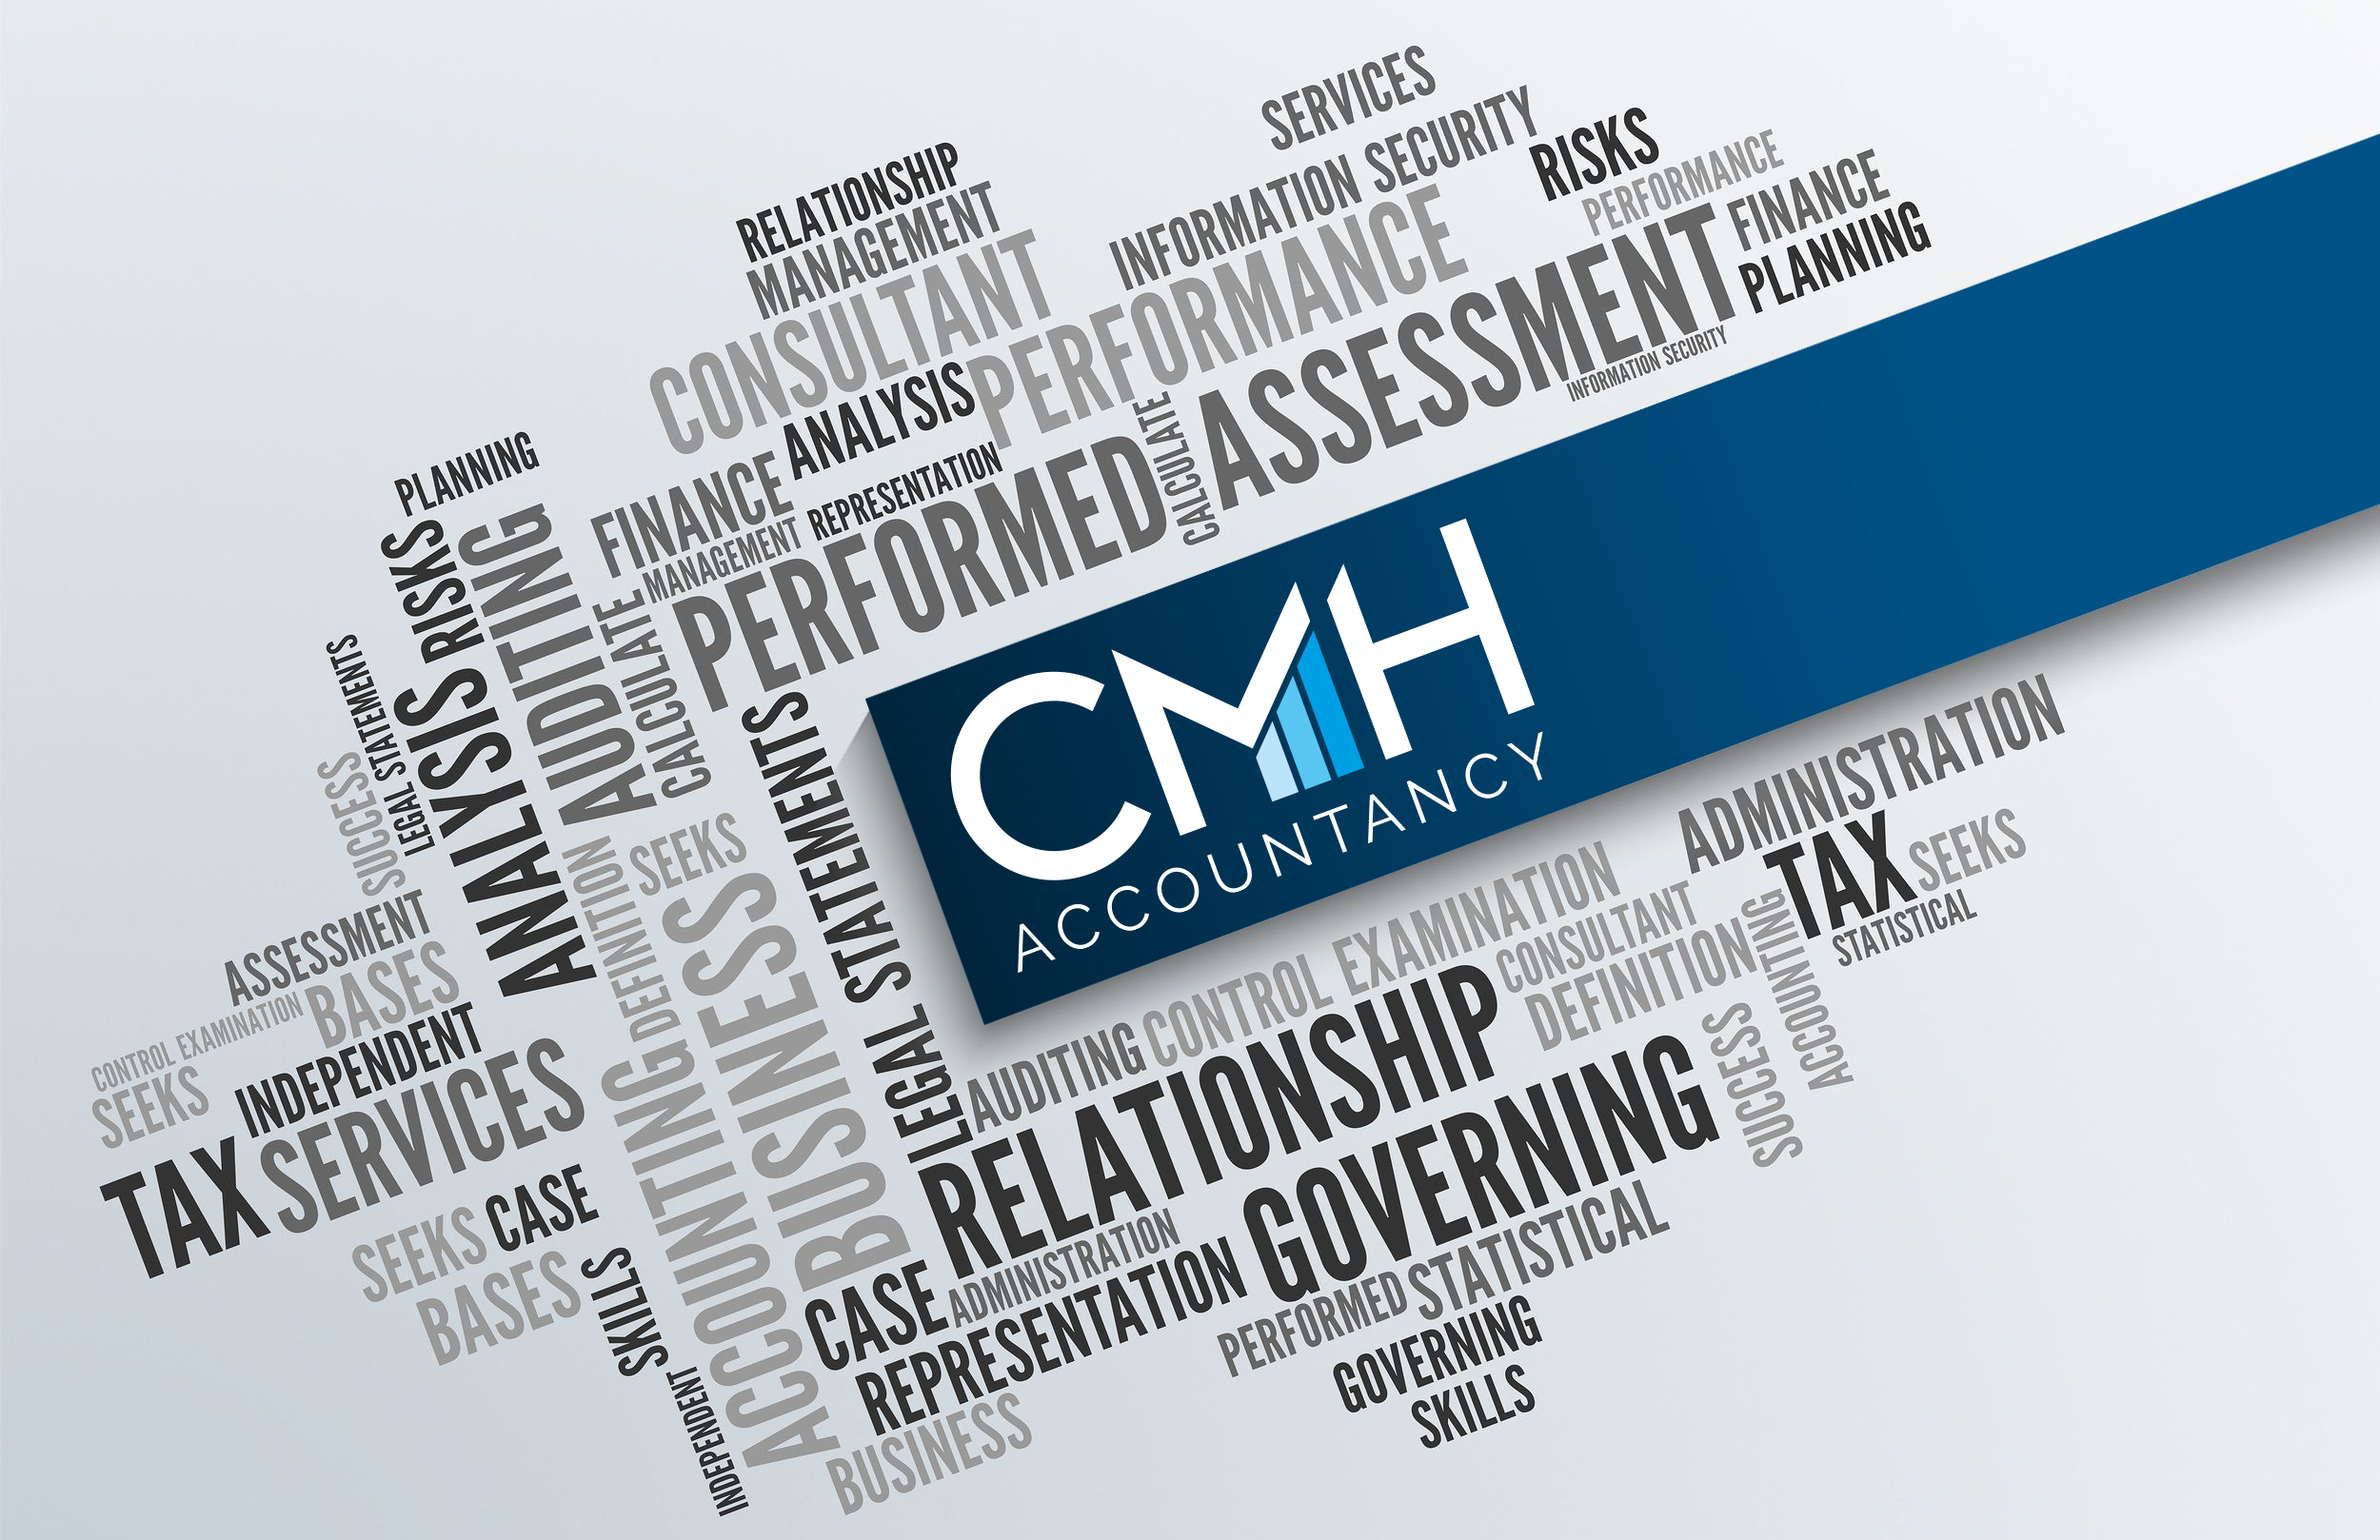 CMH Accoutancy accounts, bookkeeping, business advice and tax management, Haywards Heath, West Sussex